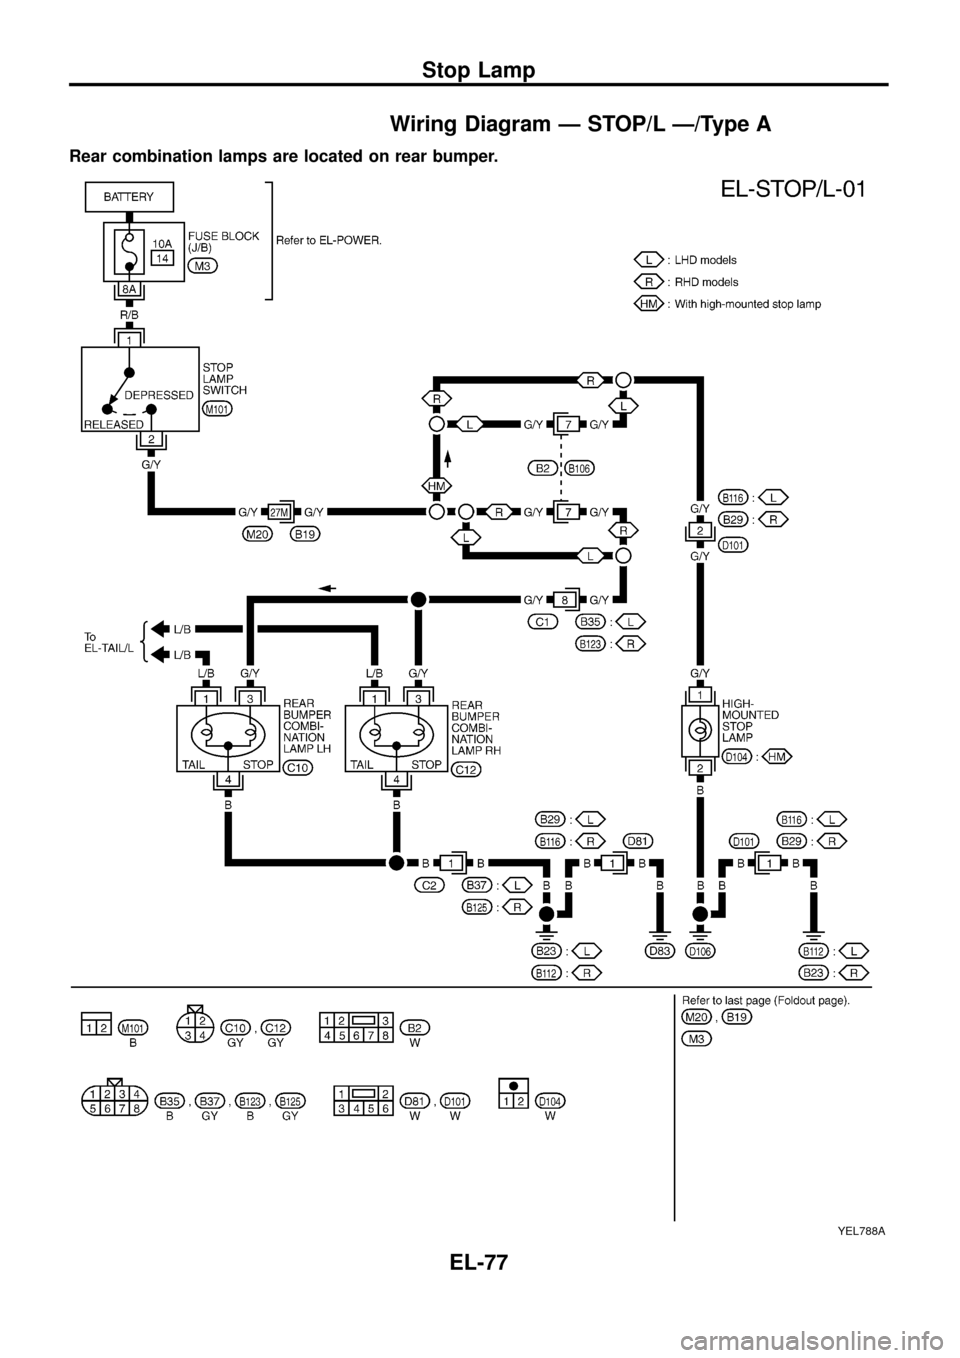 NISSAN PATROL 1998 Y61 / 5.G Electrical System Owners Manual Wiring Diagram Ð STOP/L Ð/Type A
Rear combination lamps are located on rear bumper.
YEL788A
Stop Lamp
EL-77 